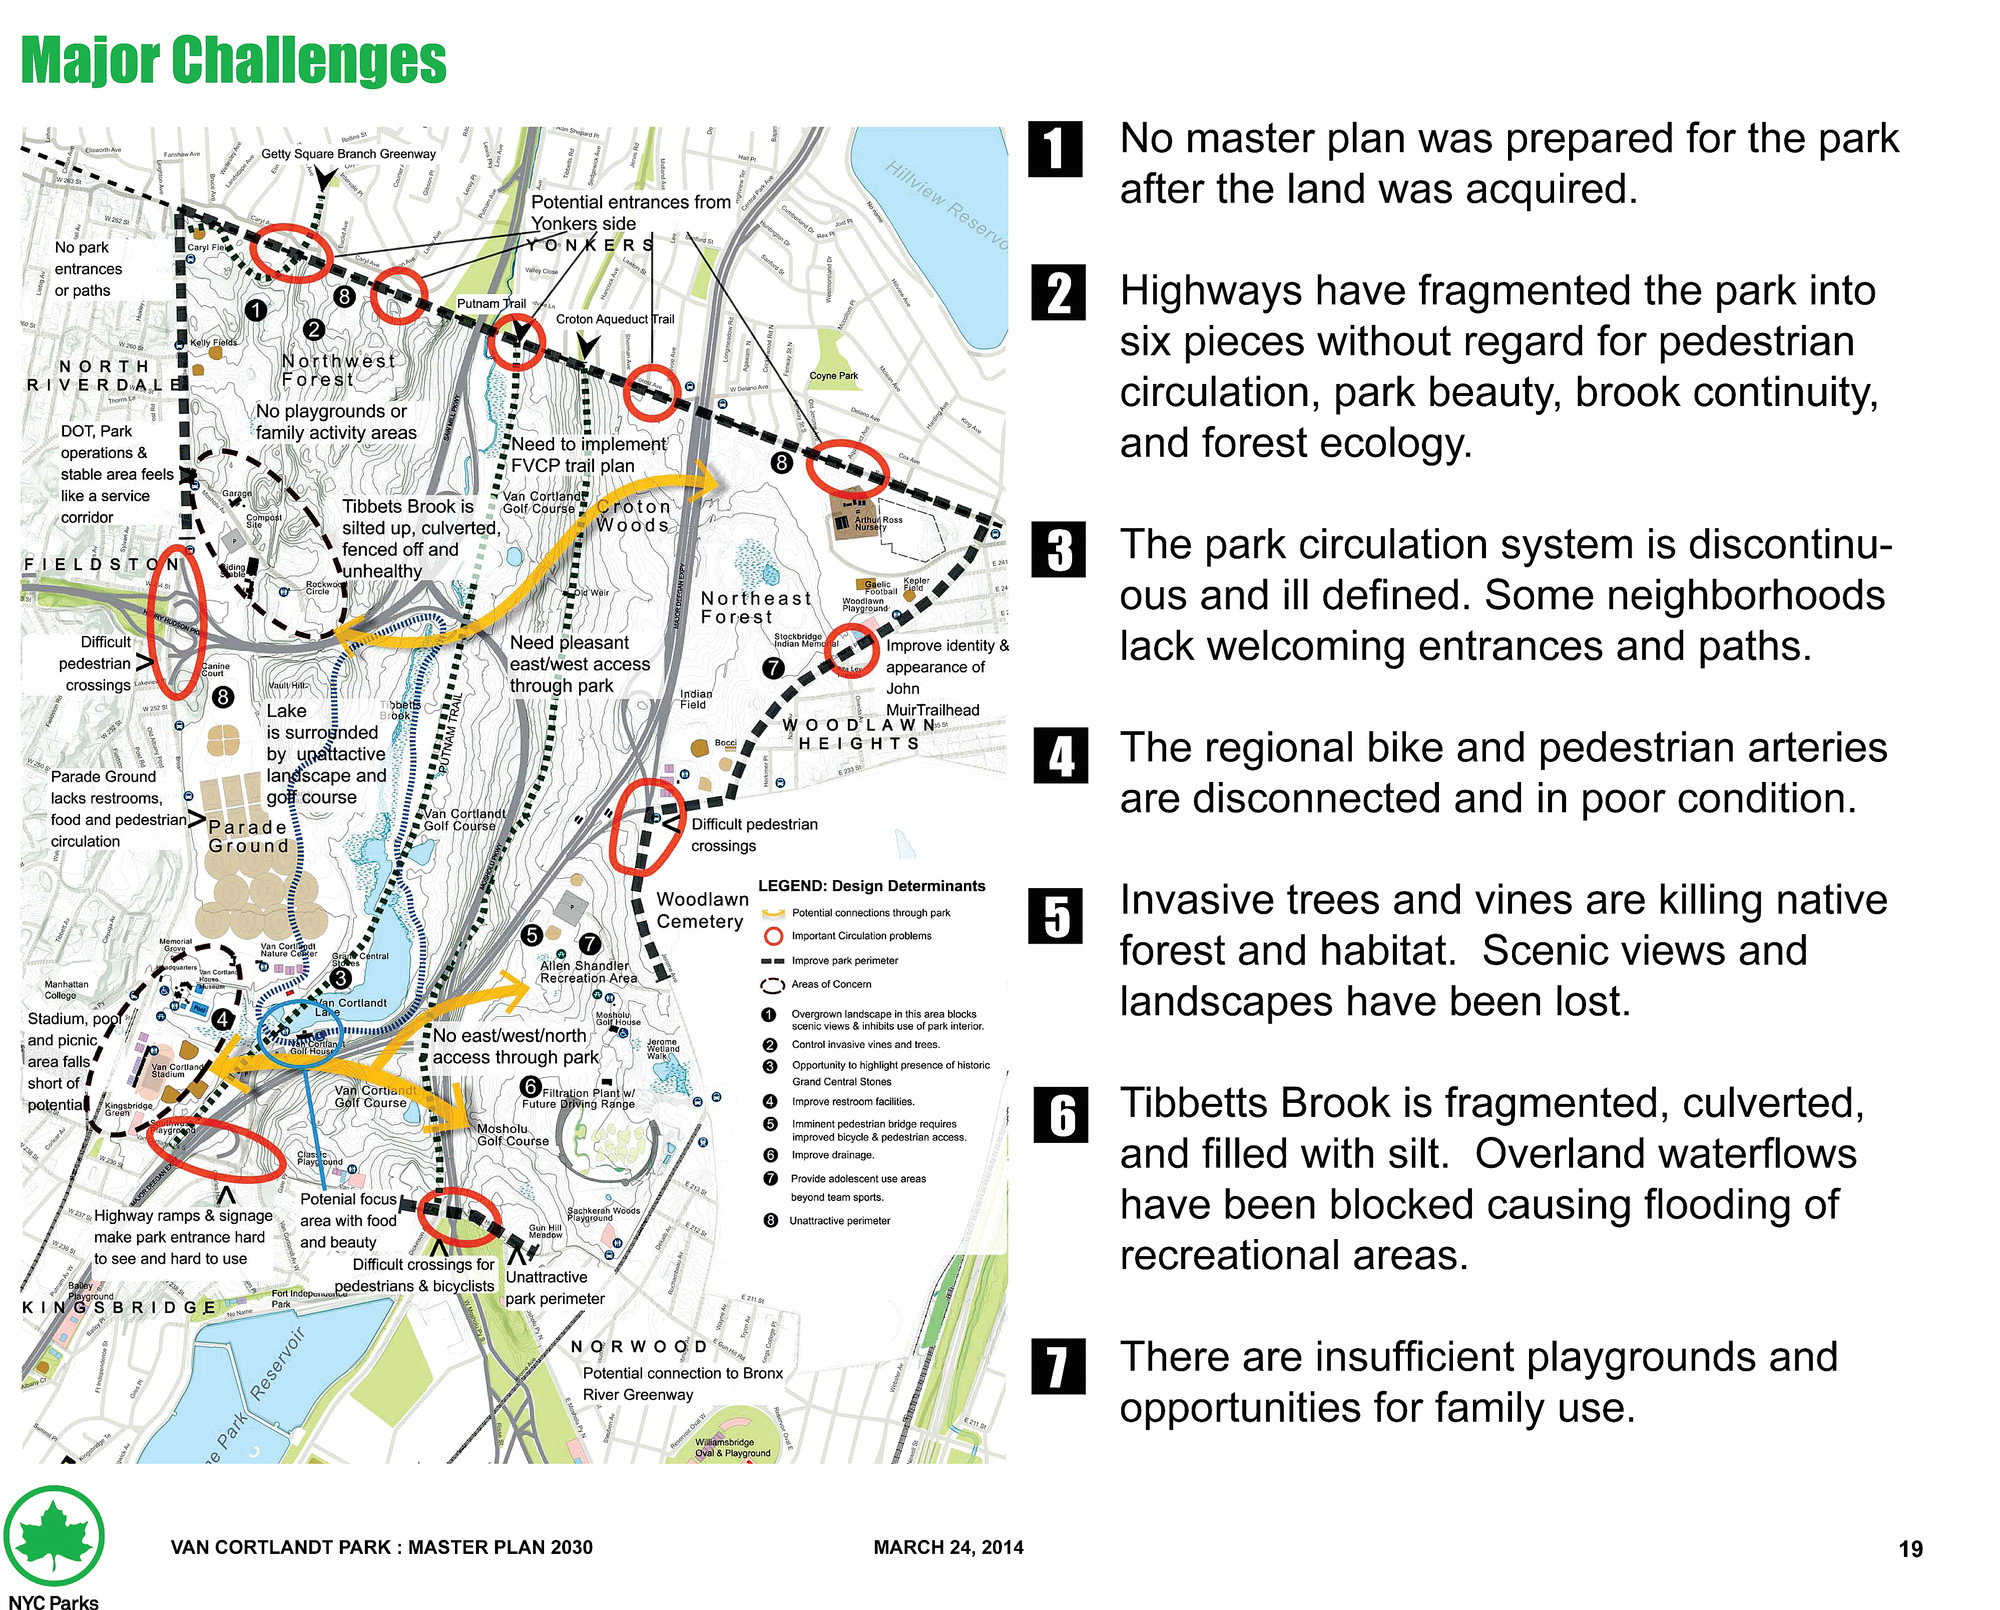 Sample pages from the Parks Department's plan.